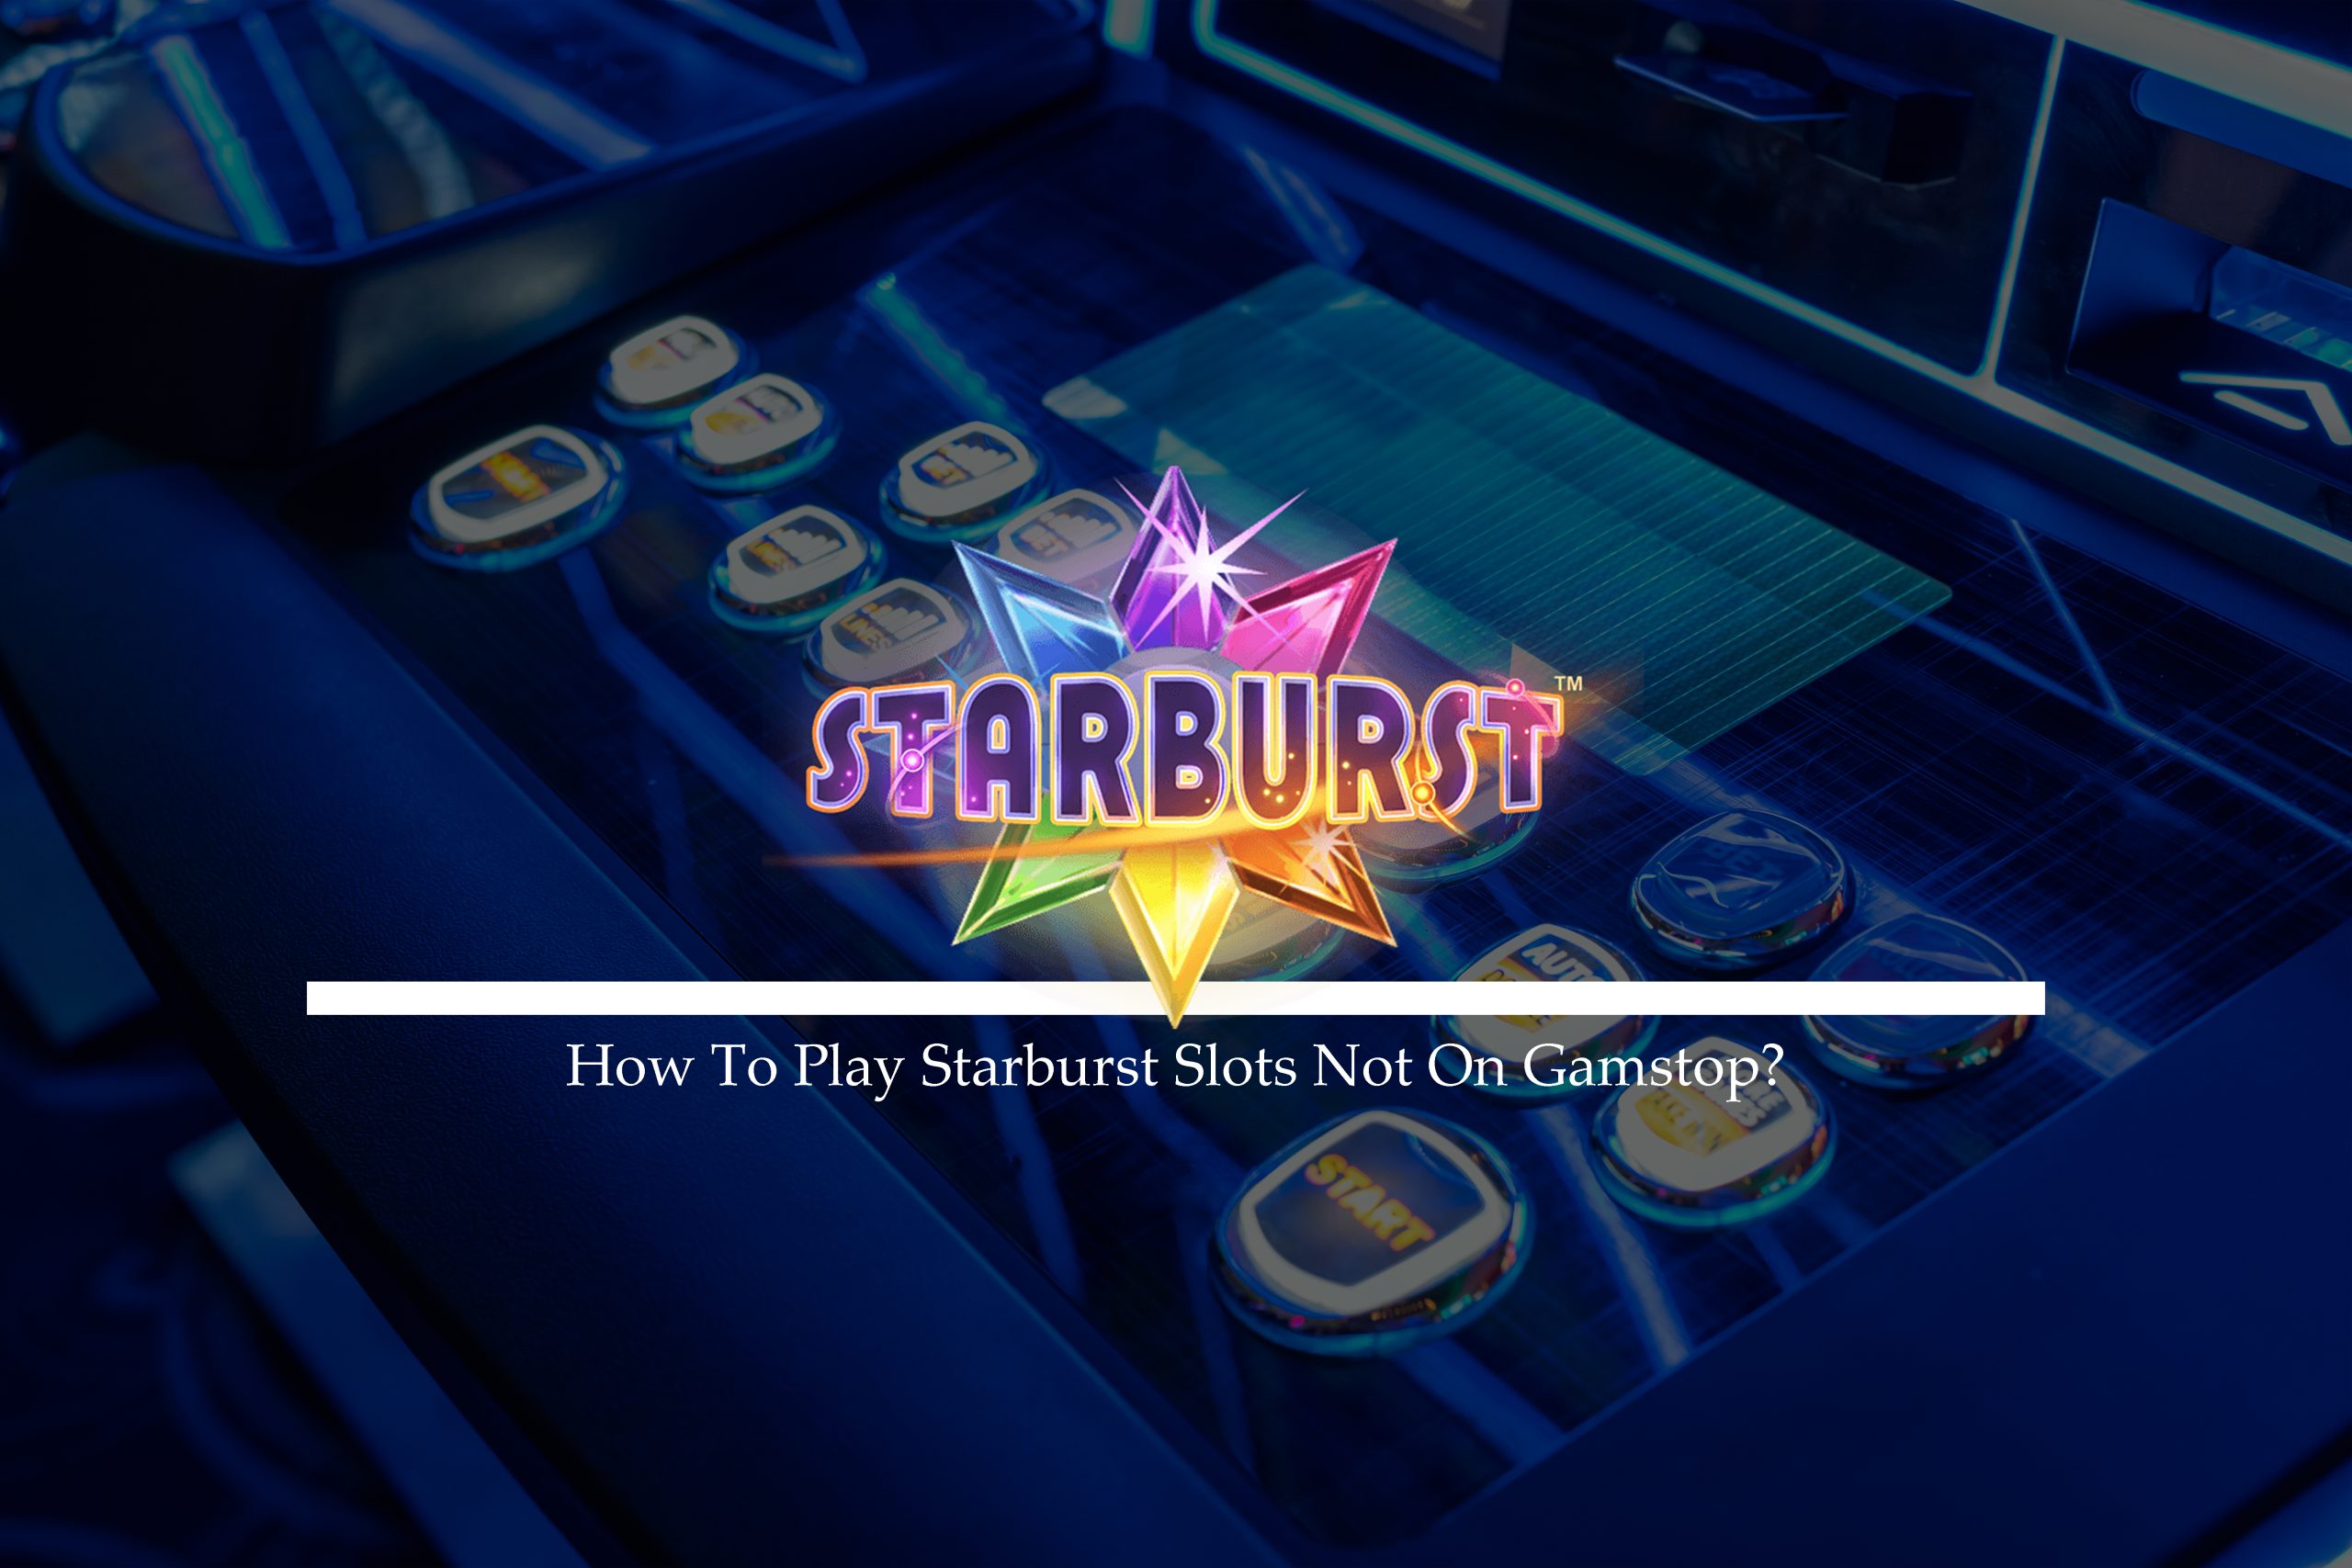 How To Play Starburst Slots Not On Gamstop?